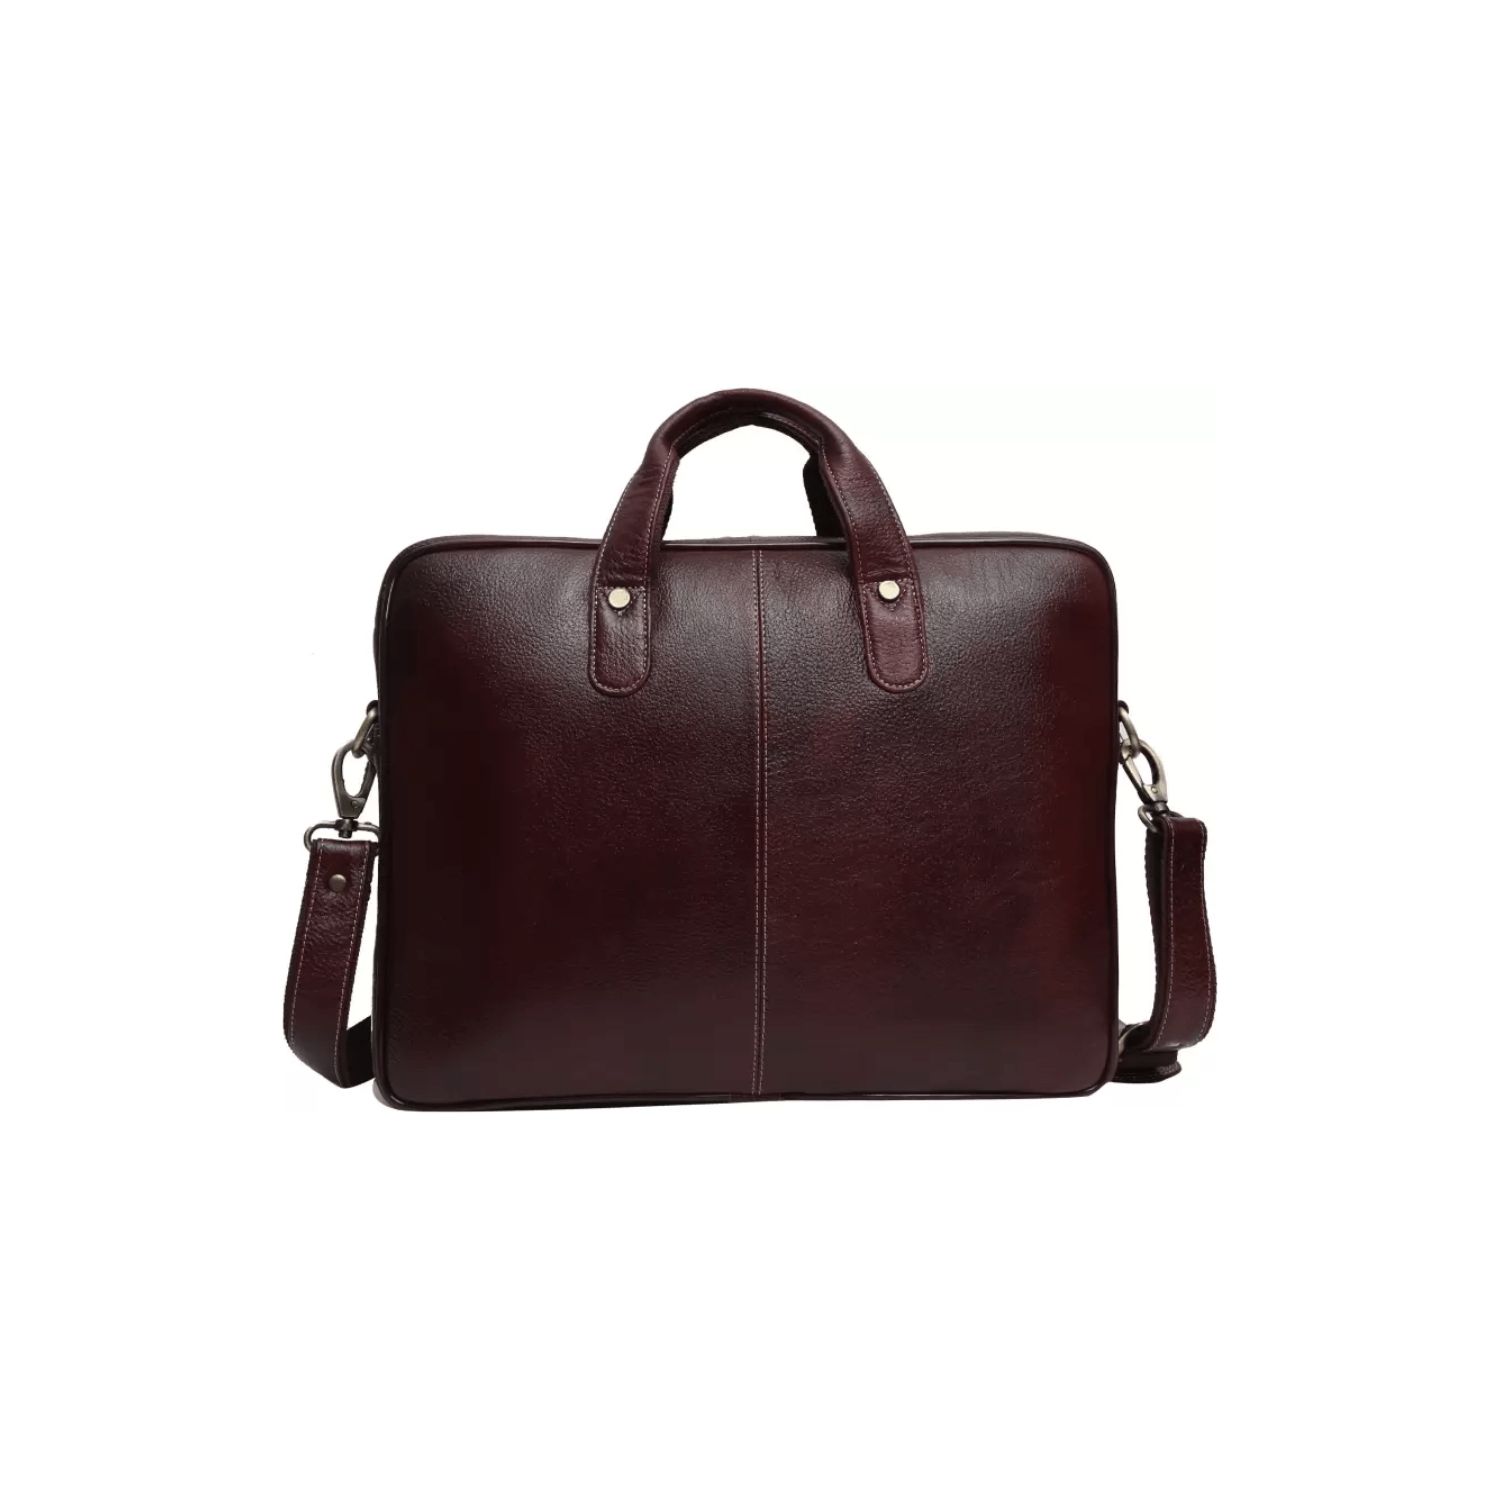 Corporate Edition One Leather Laptop Bag | Merch Story